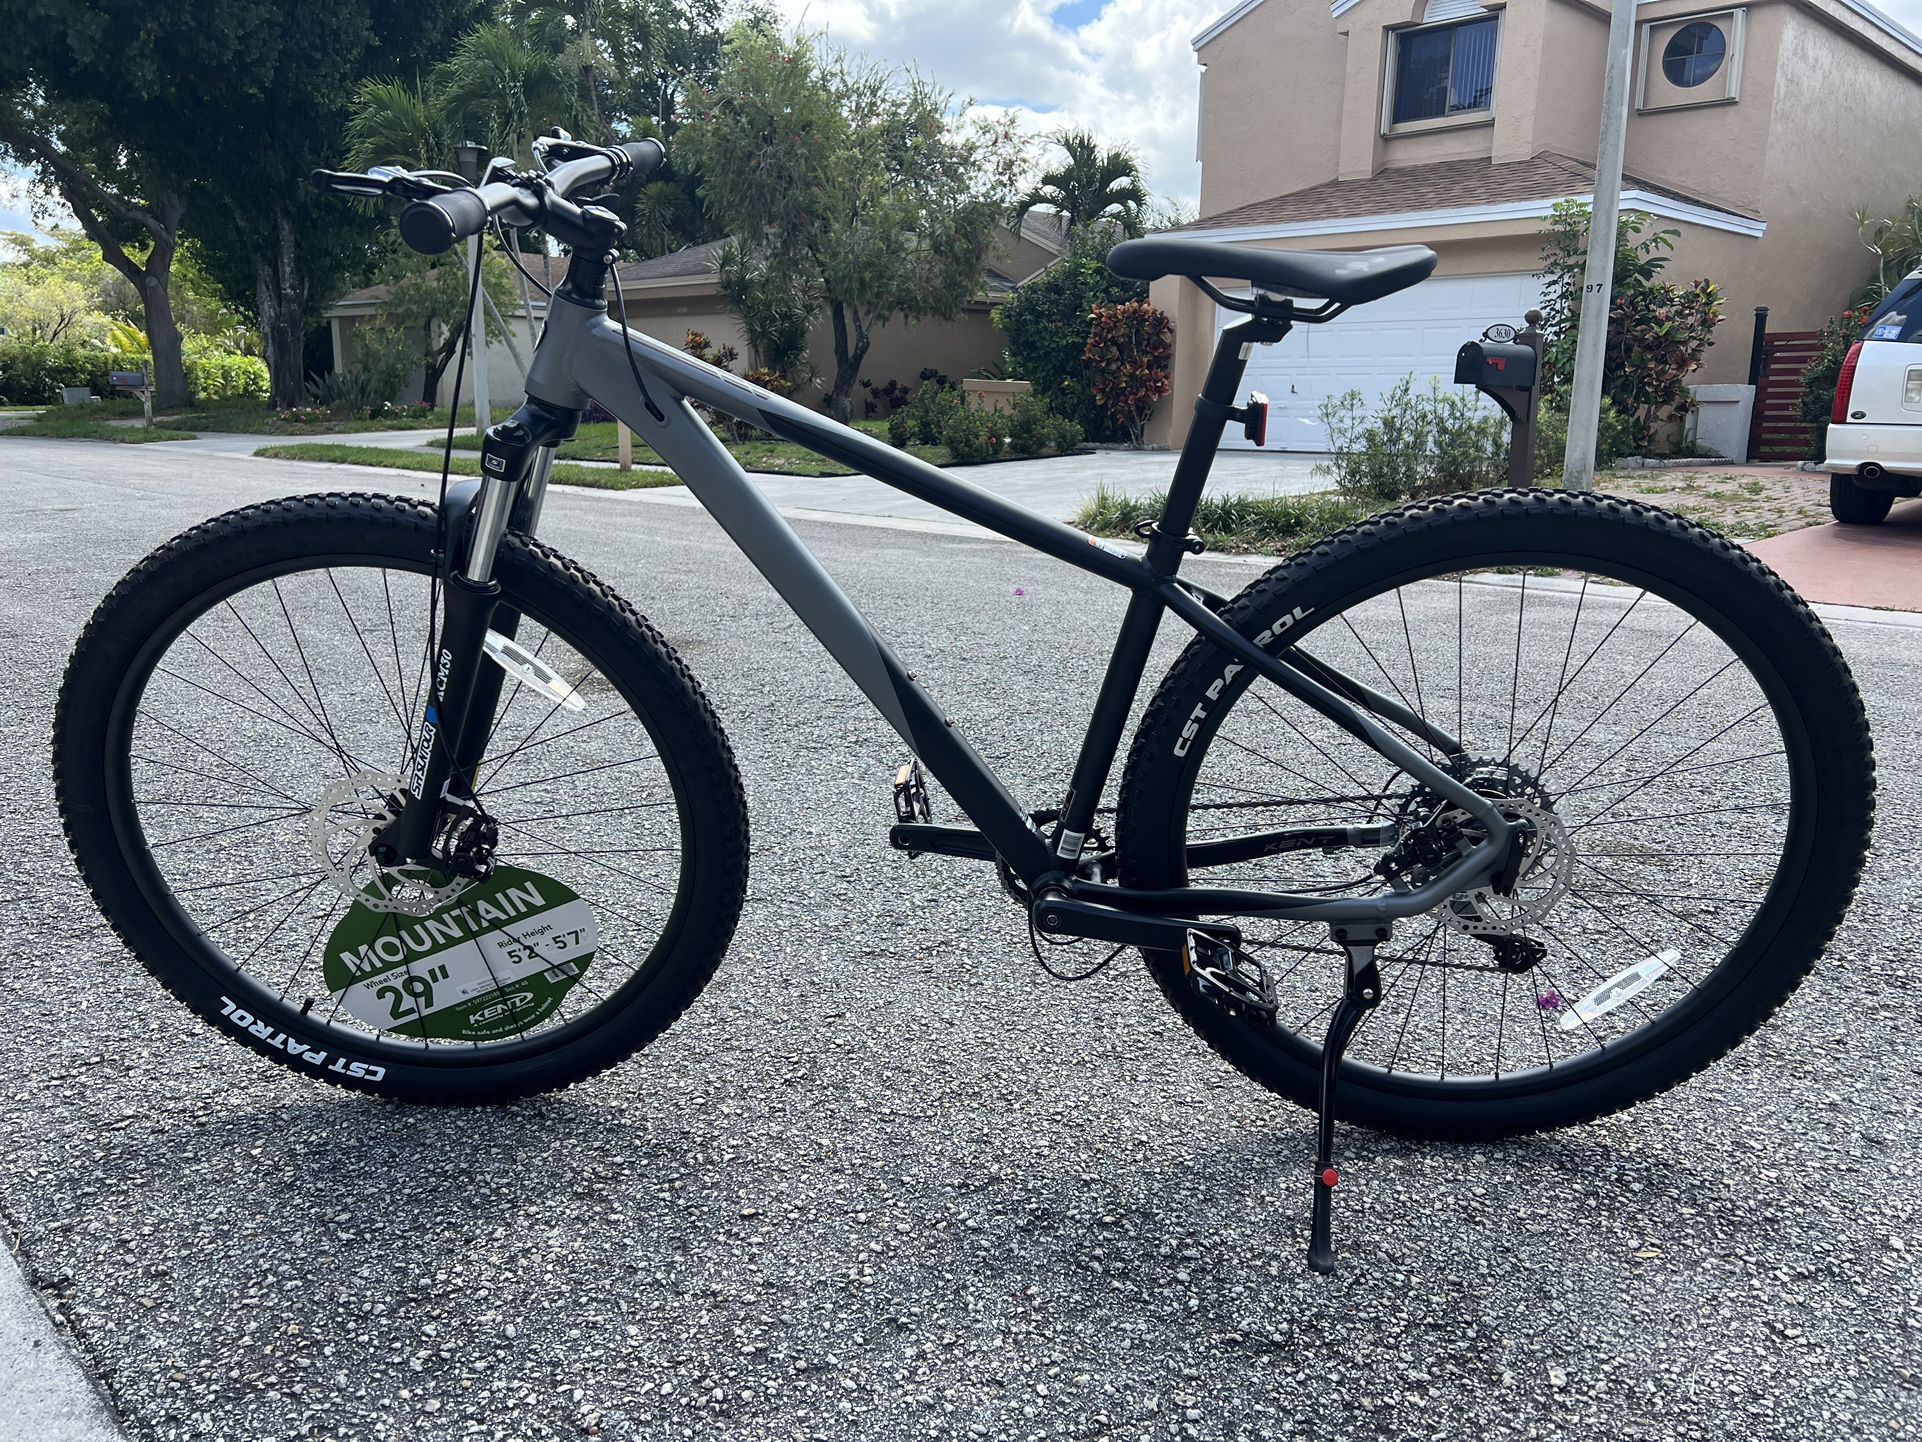  Mountain Bike - 29" Trouvaille - Black and Taupe